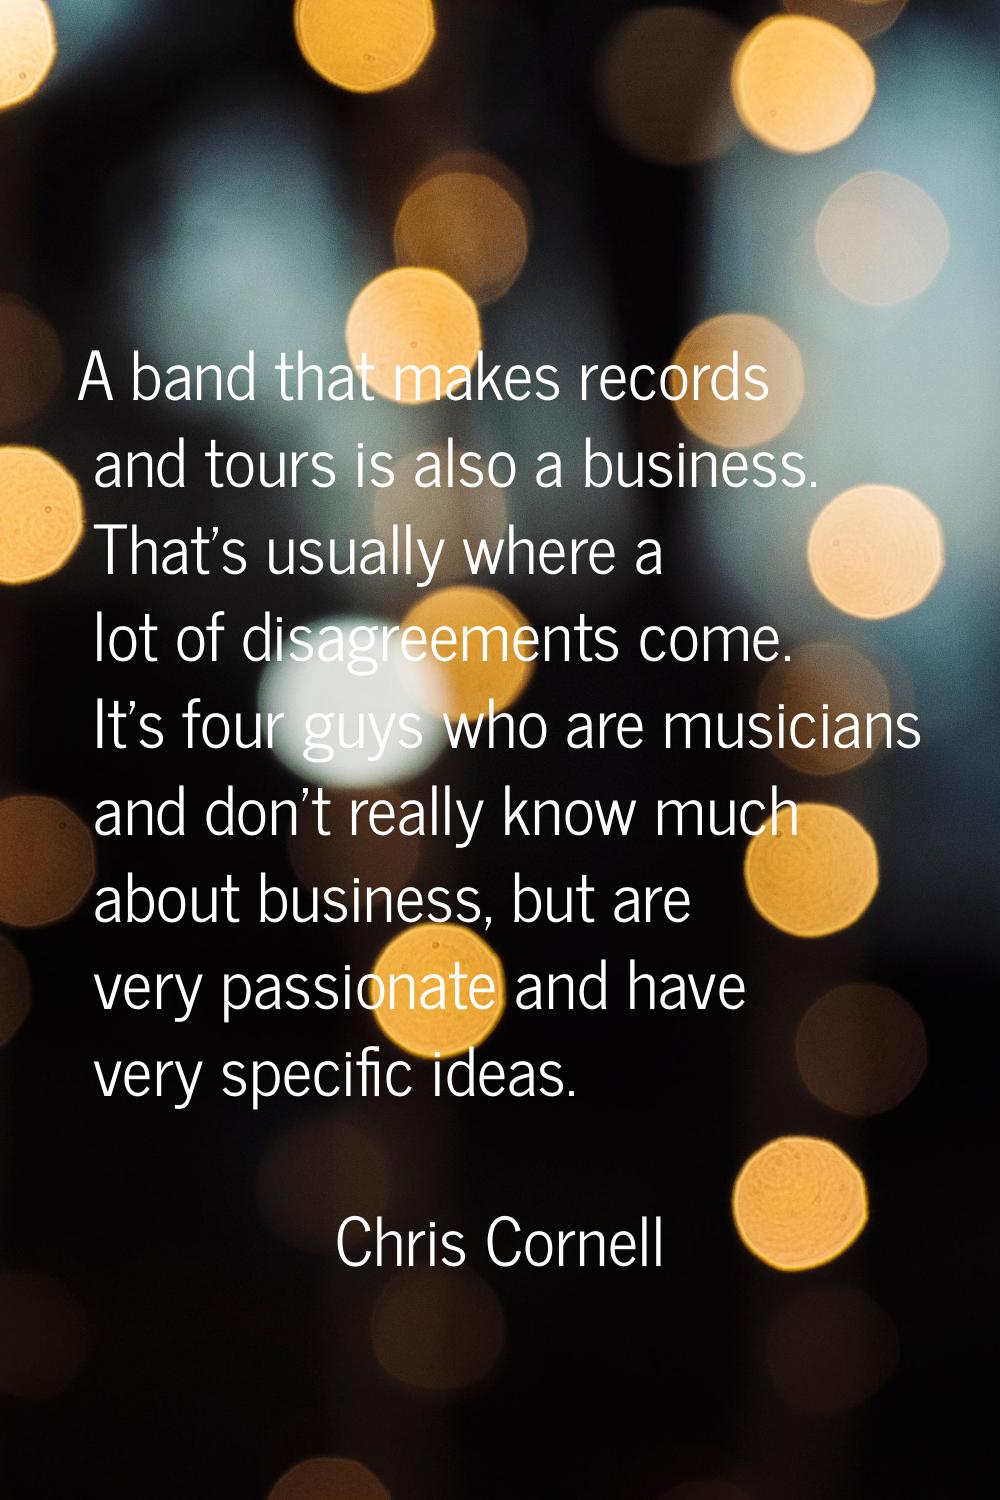 A band that makes records and tours is also a business. That's usually where a lot of disagreements